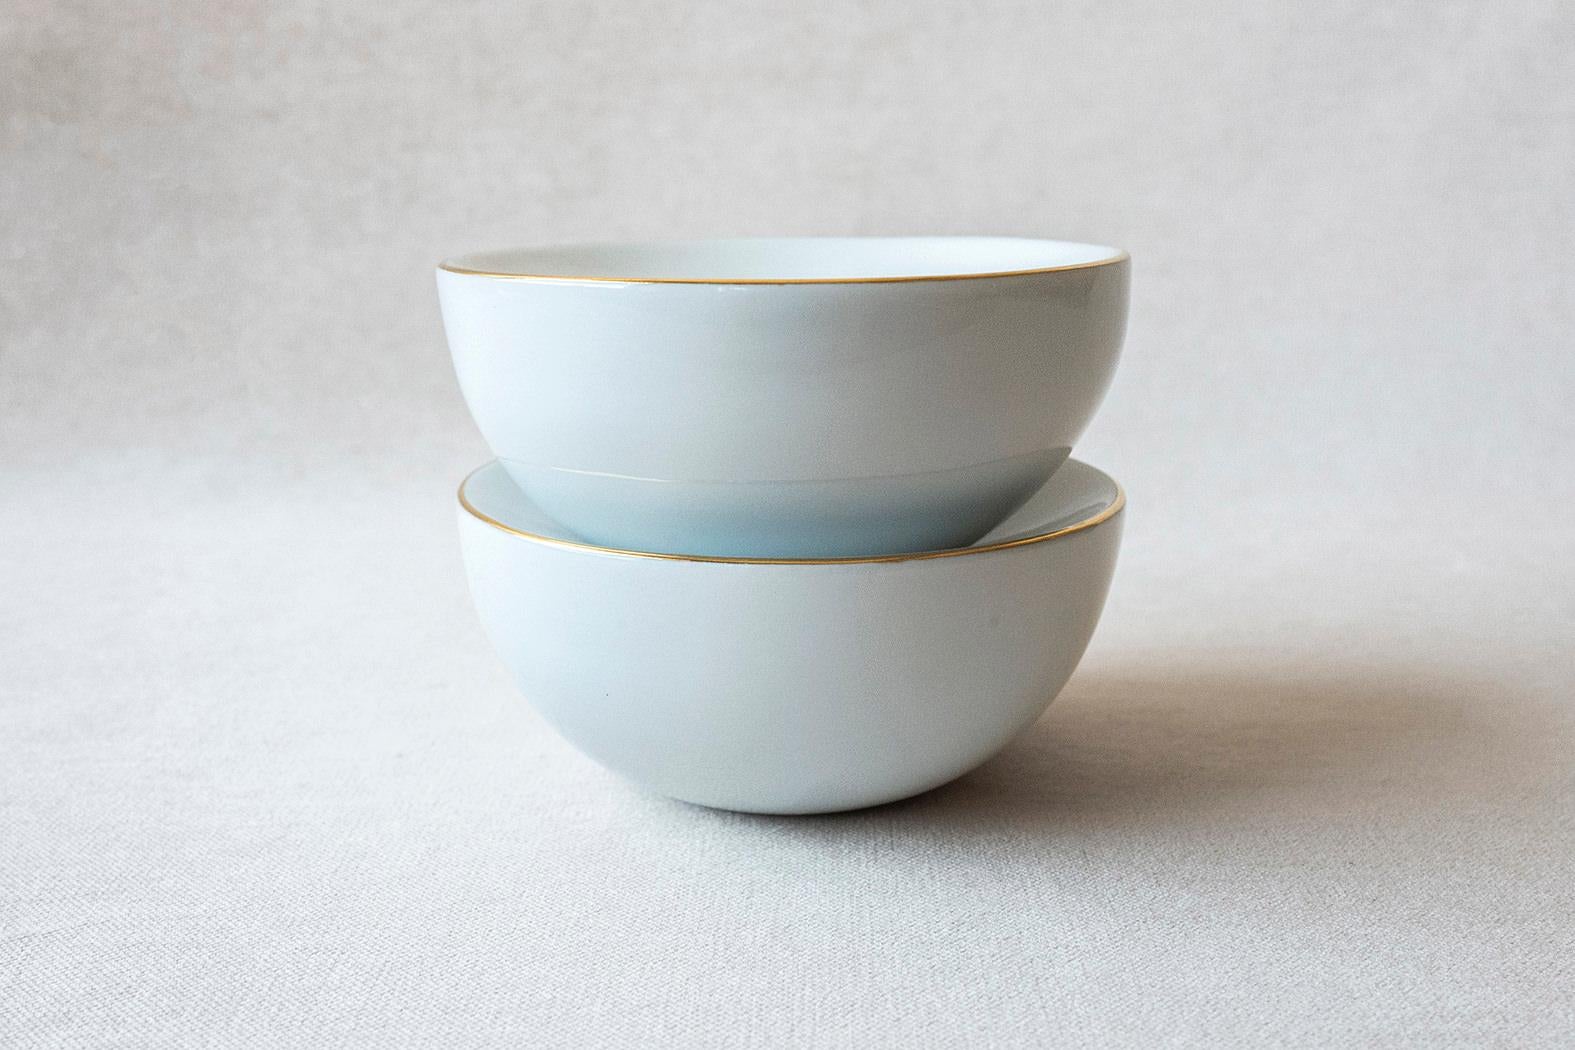 • Set of 2 medium porcelain side dishes
• 11,5 cm ø x 5,5 cm
• perfect for a sexy amuse-bouche, a pre-dessert or side dish
• also works for the essential butter on the table
• white glazed with a very luxurious 24k hand painted golden rim
•